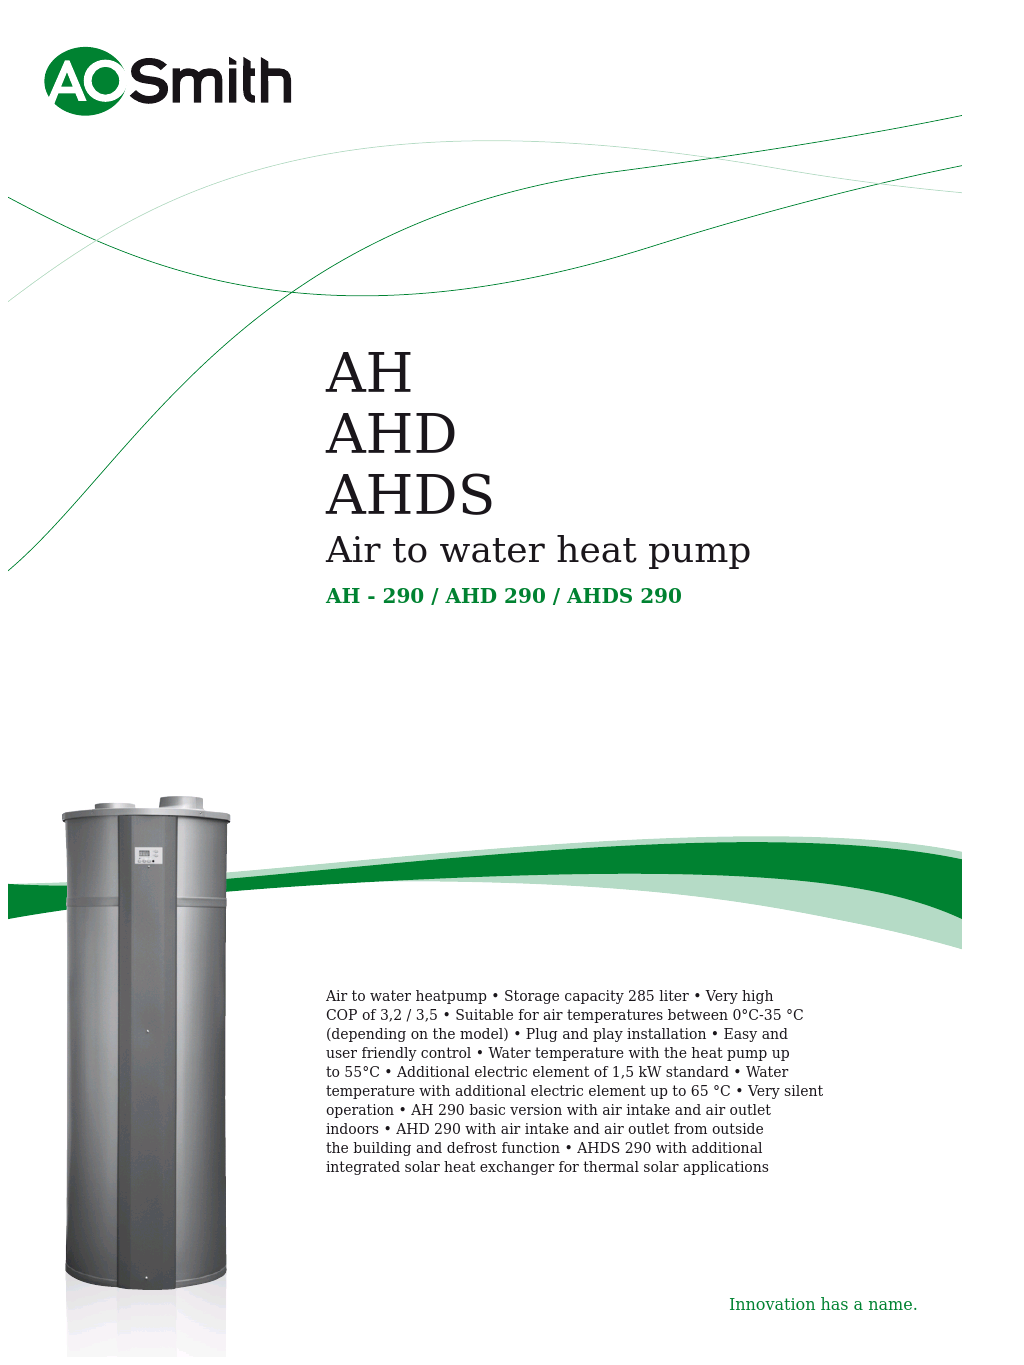 AHDS 290